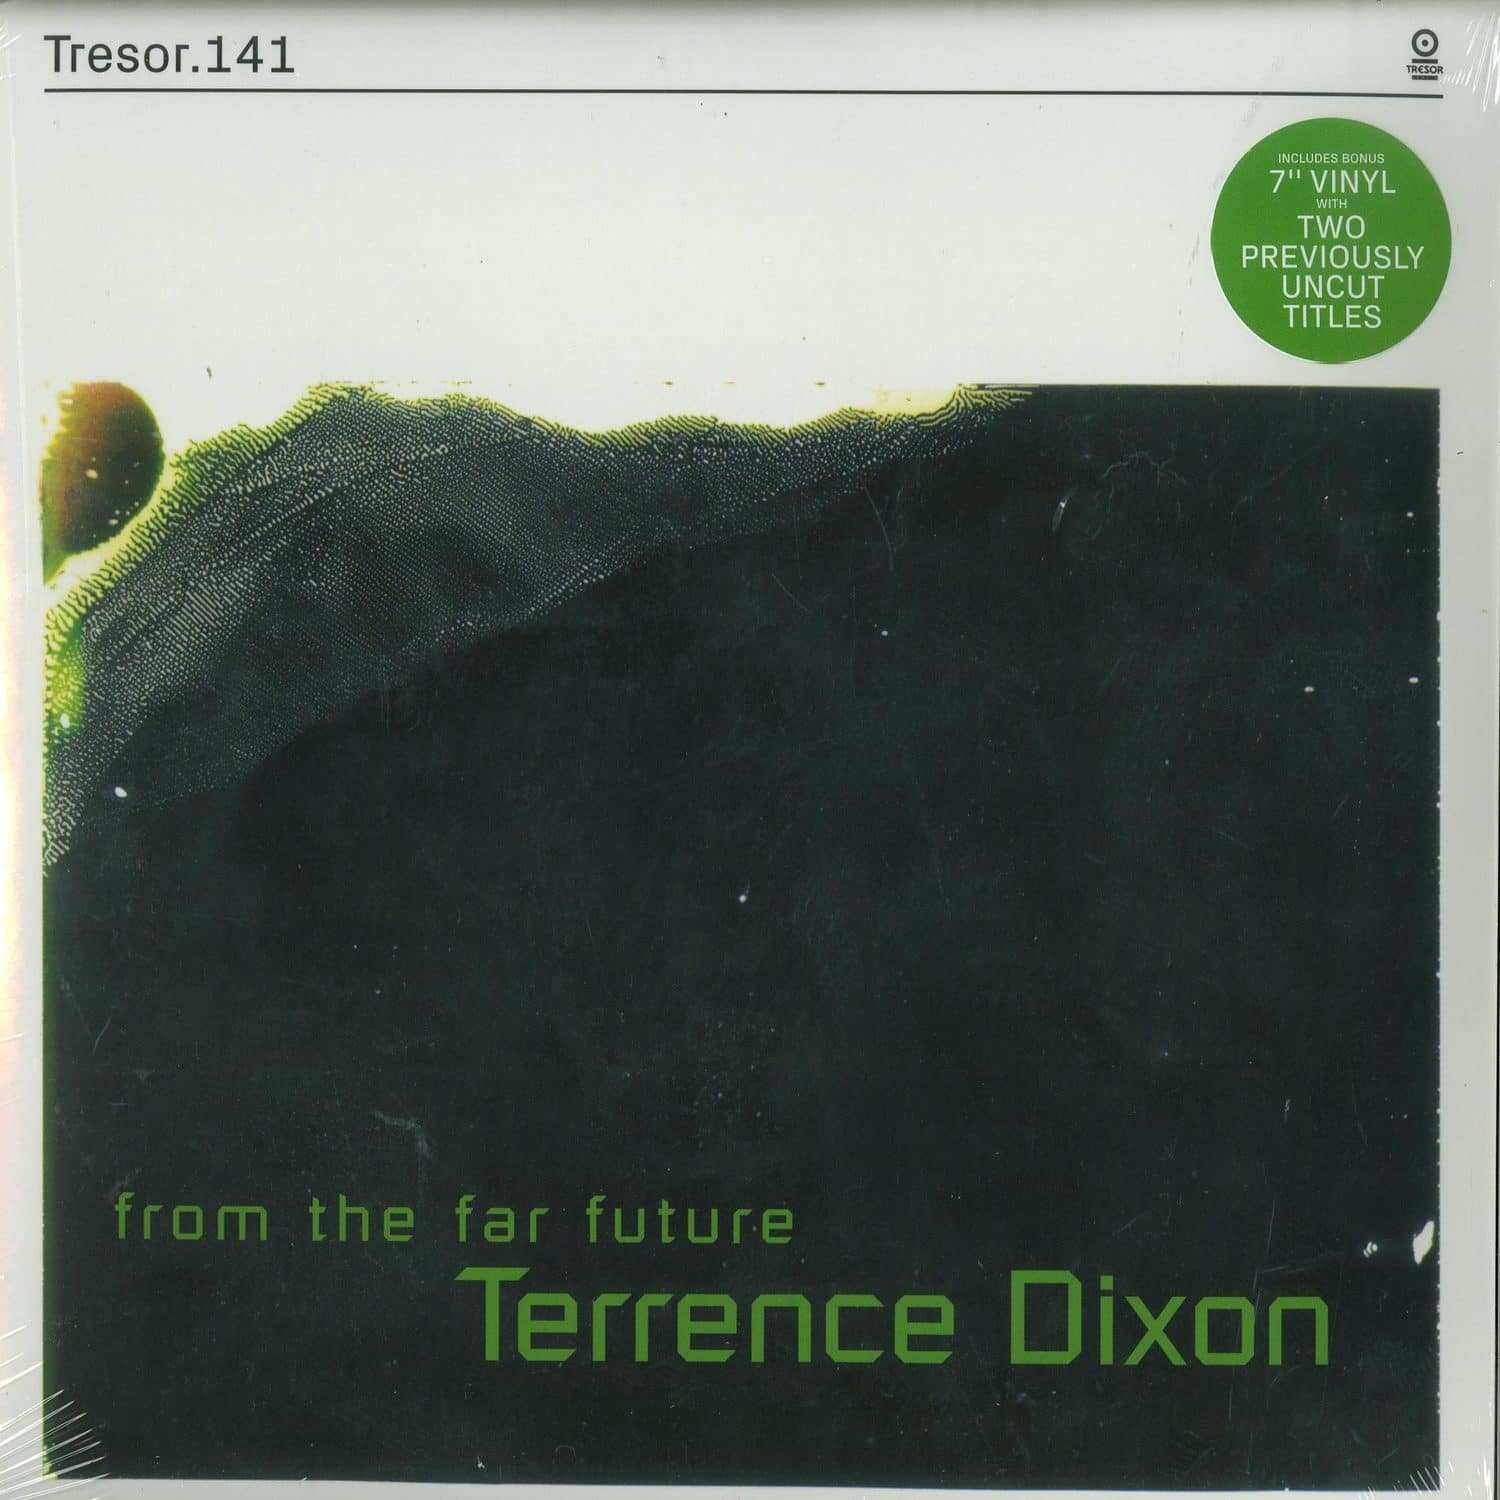 Terrence Dixon - FROM THE FAR FUTURE 